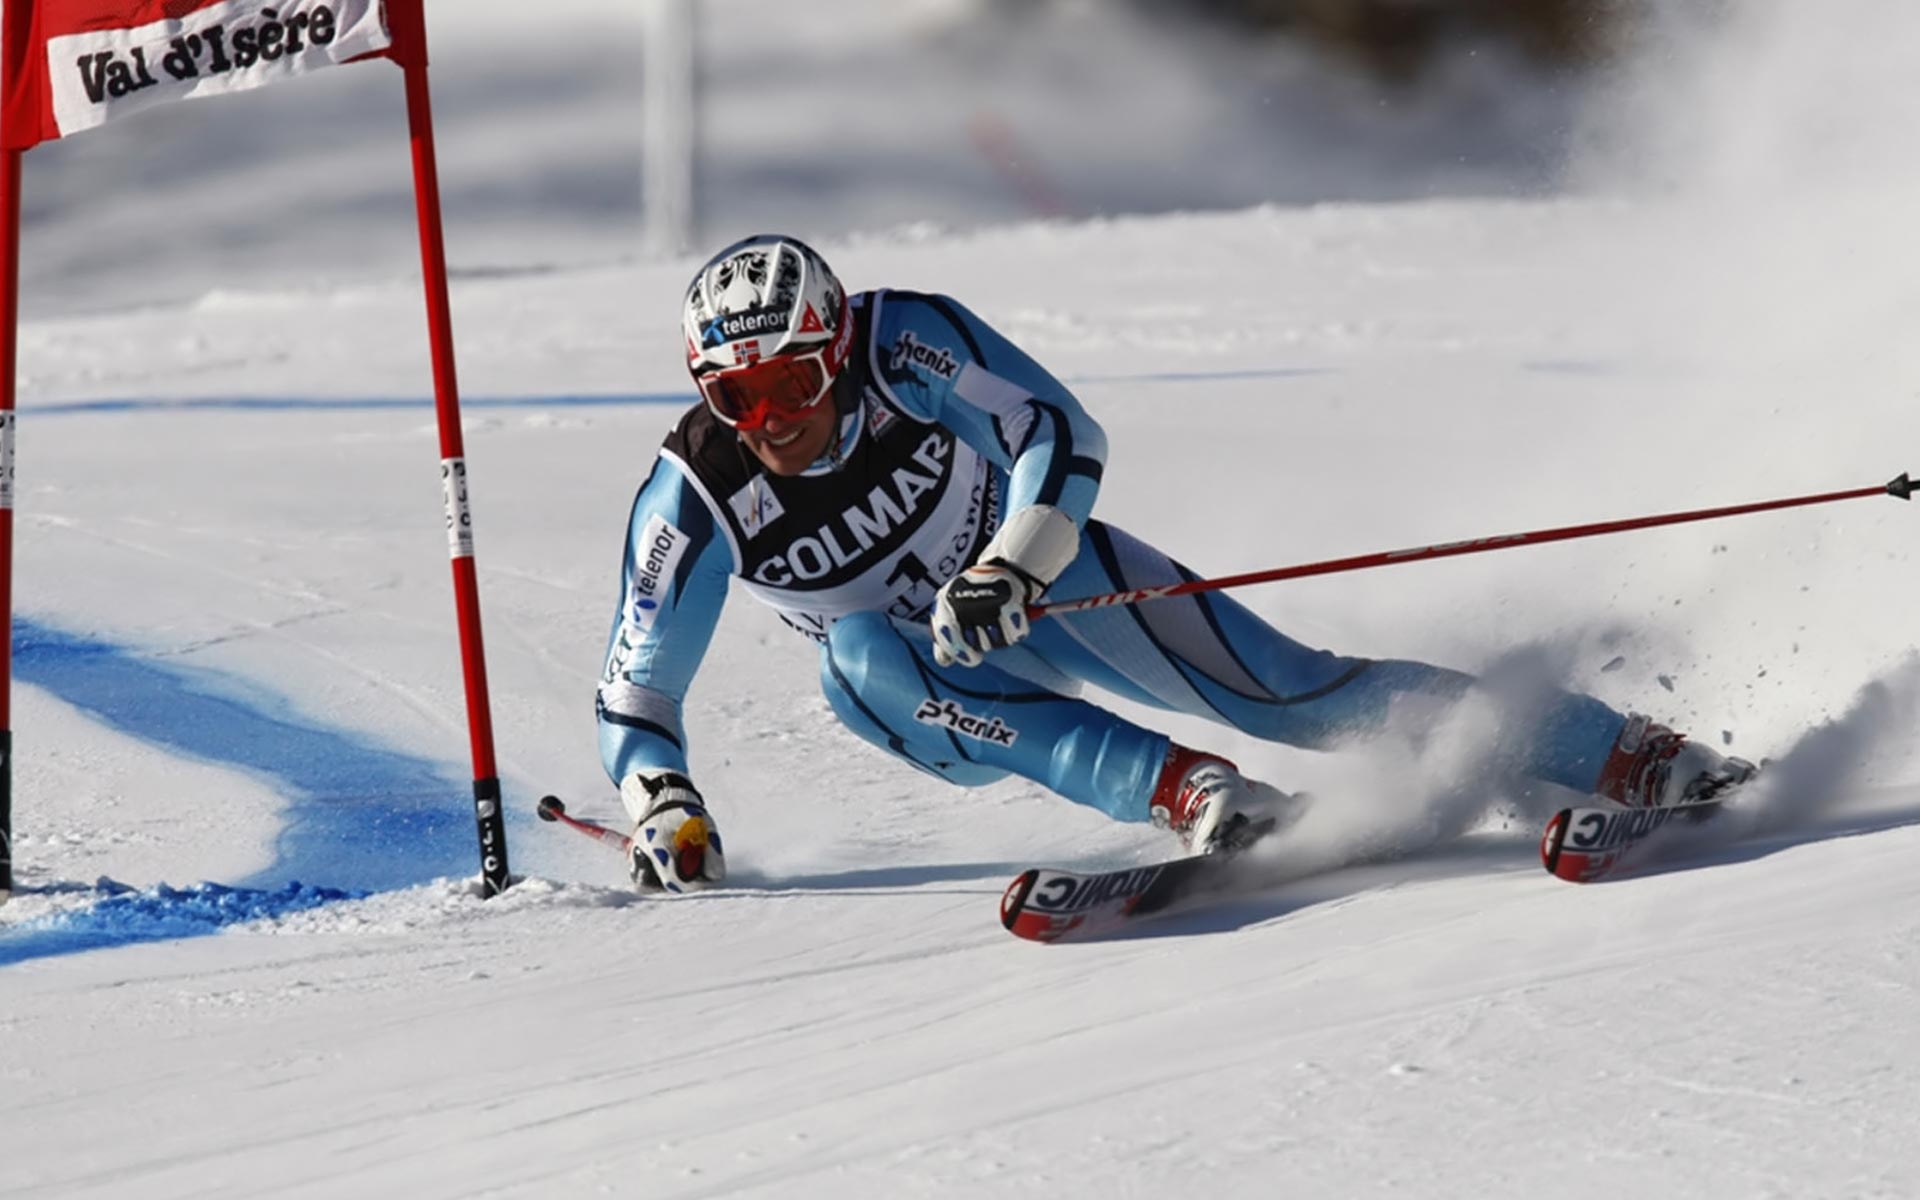 Slalom: Skiing, A downhill ski race over a winding course marked by poles or gates. 1920x1200 HD Background.